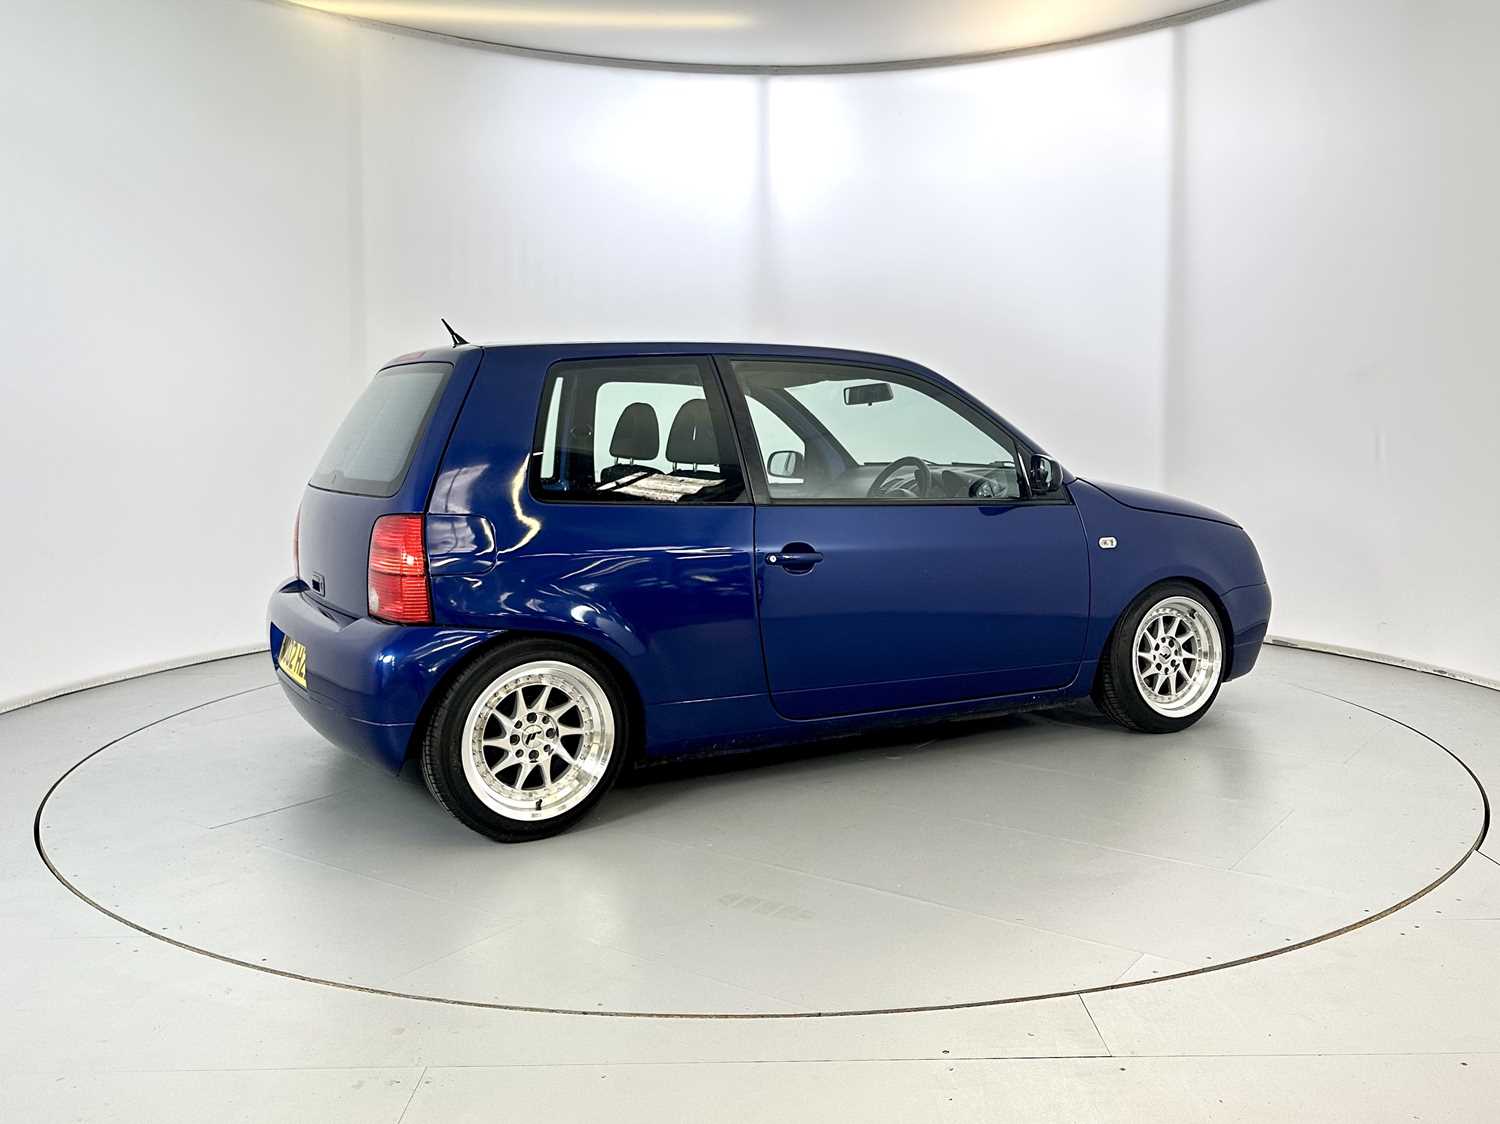 2002 Volkswagen Lupo - Image 10 of 28